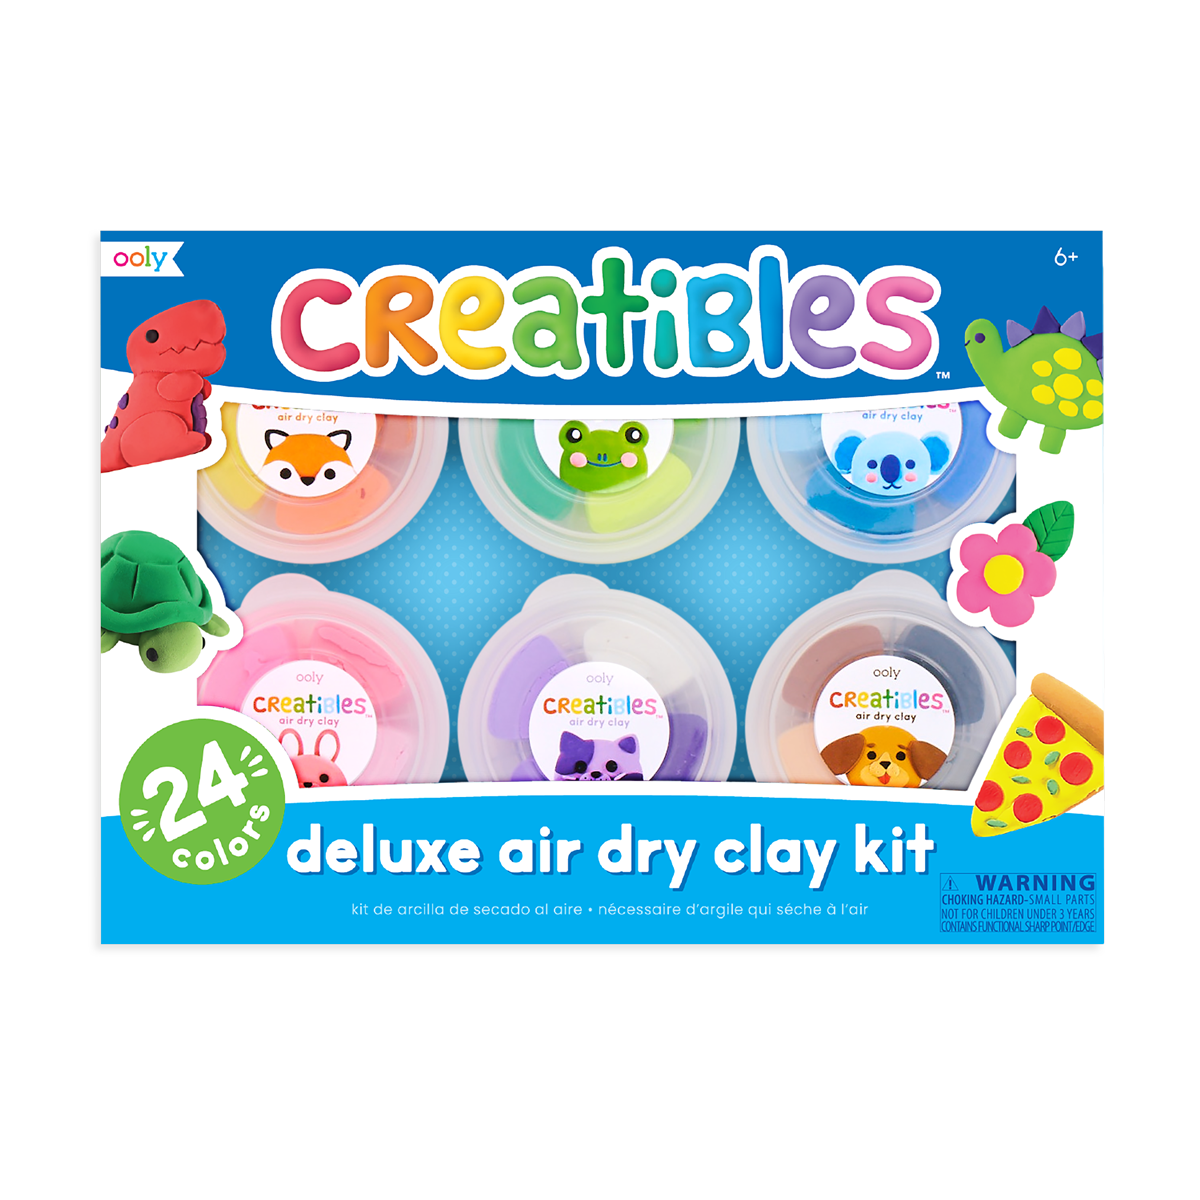 OOLY Creatibles D.I.Y. Air Dry Clay Kit - Set of 24 Colors Clay Kits